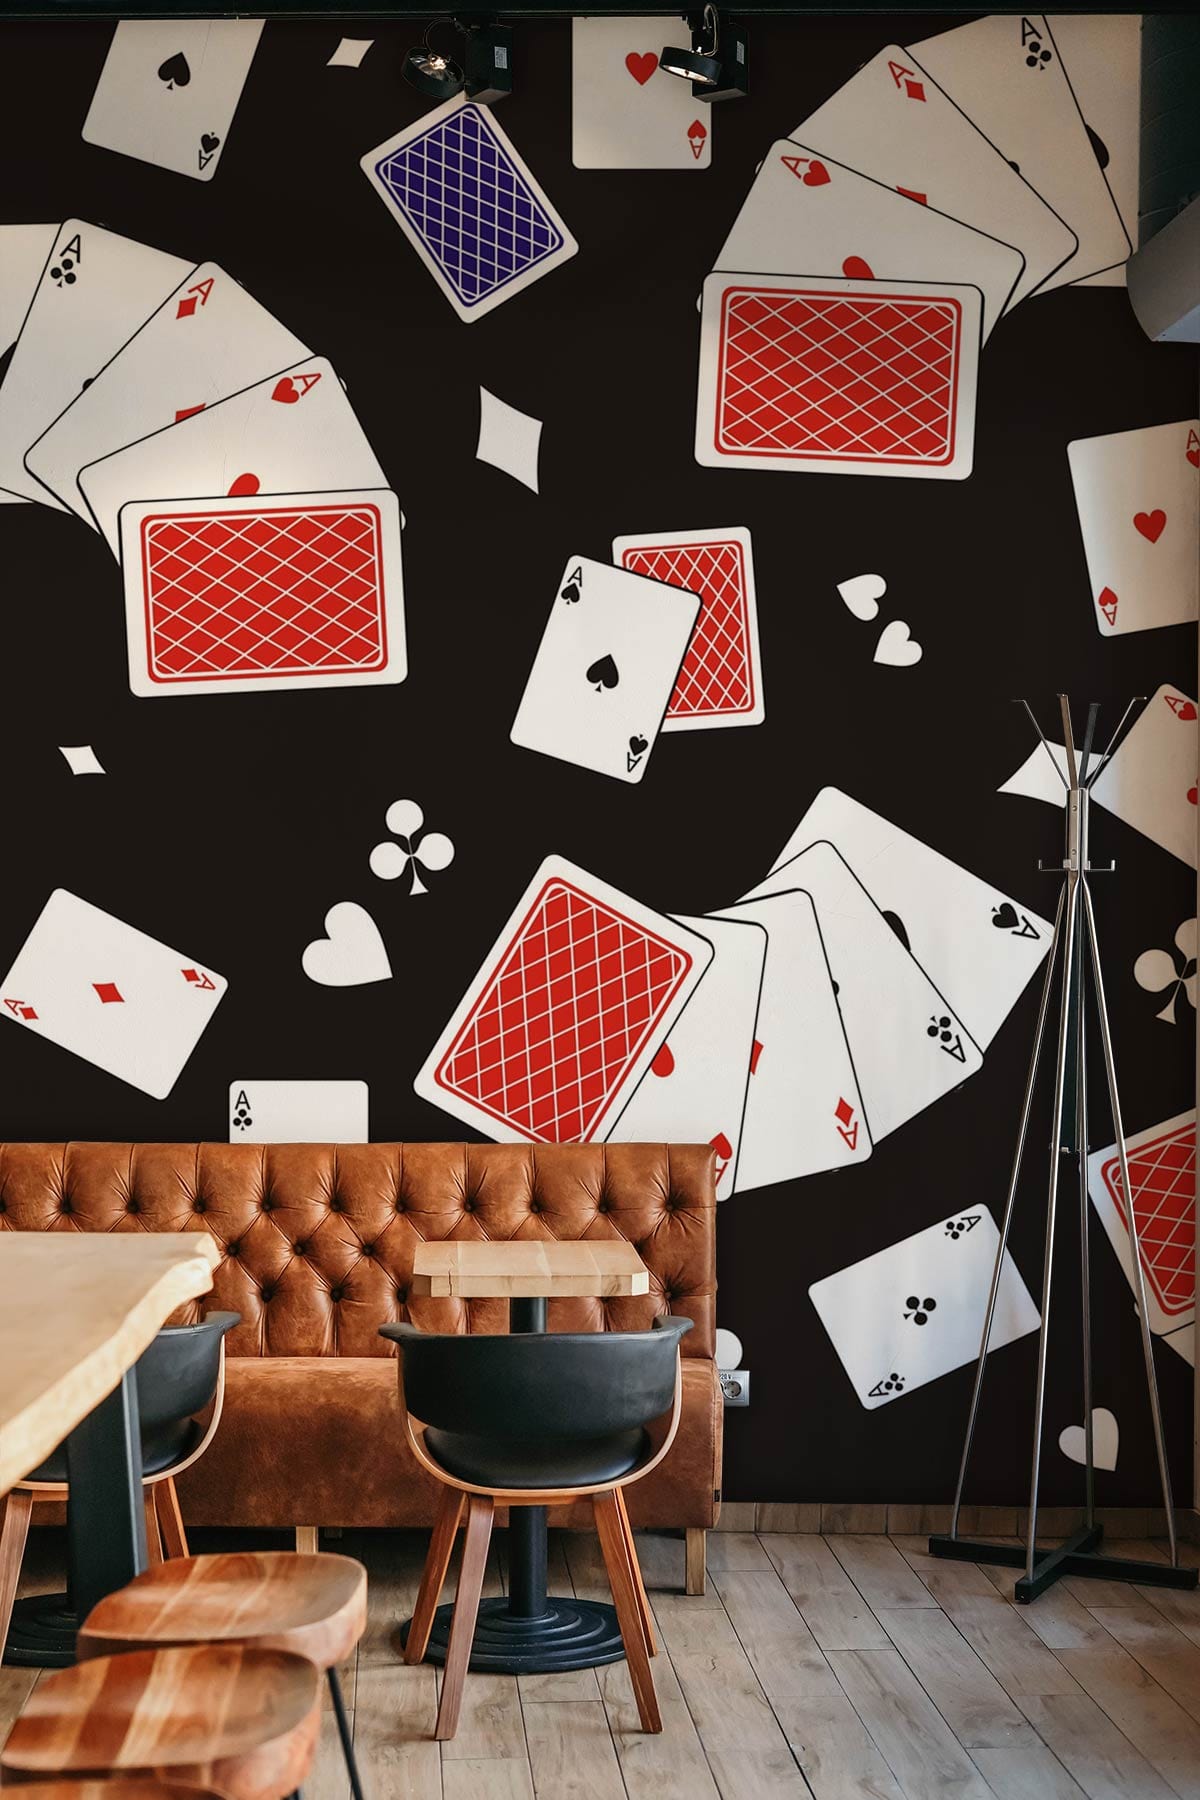 Mural design featuring four different types of poker patterns and the word A in the center